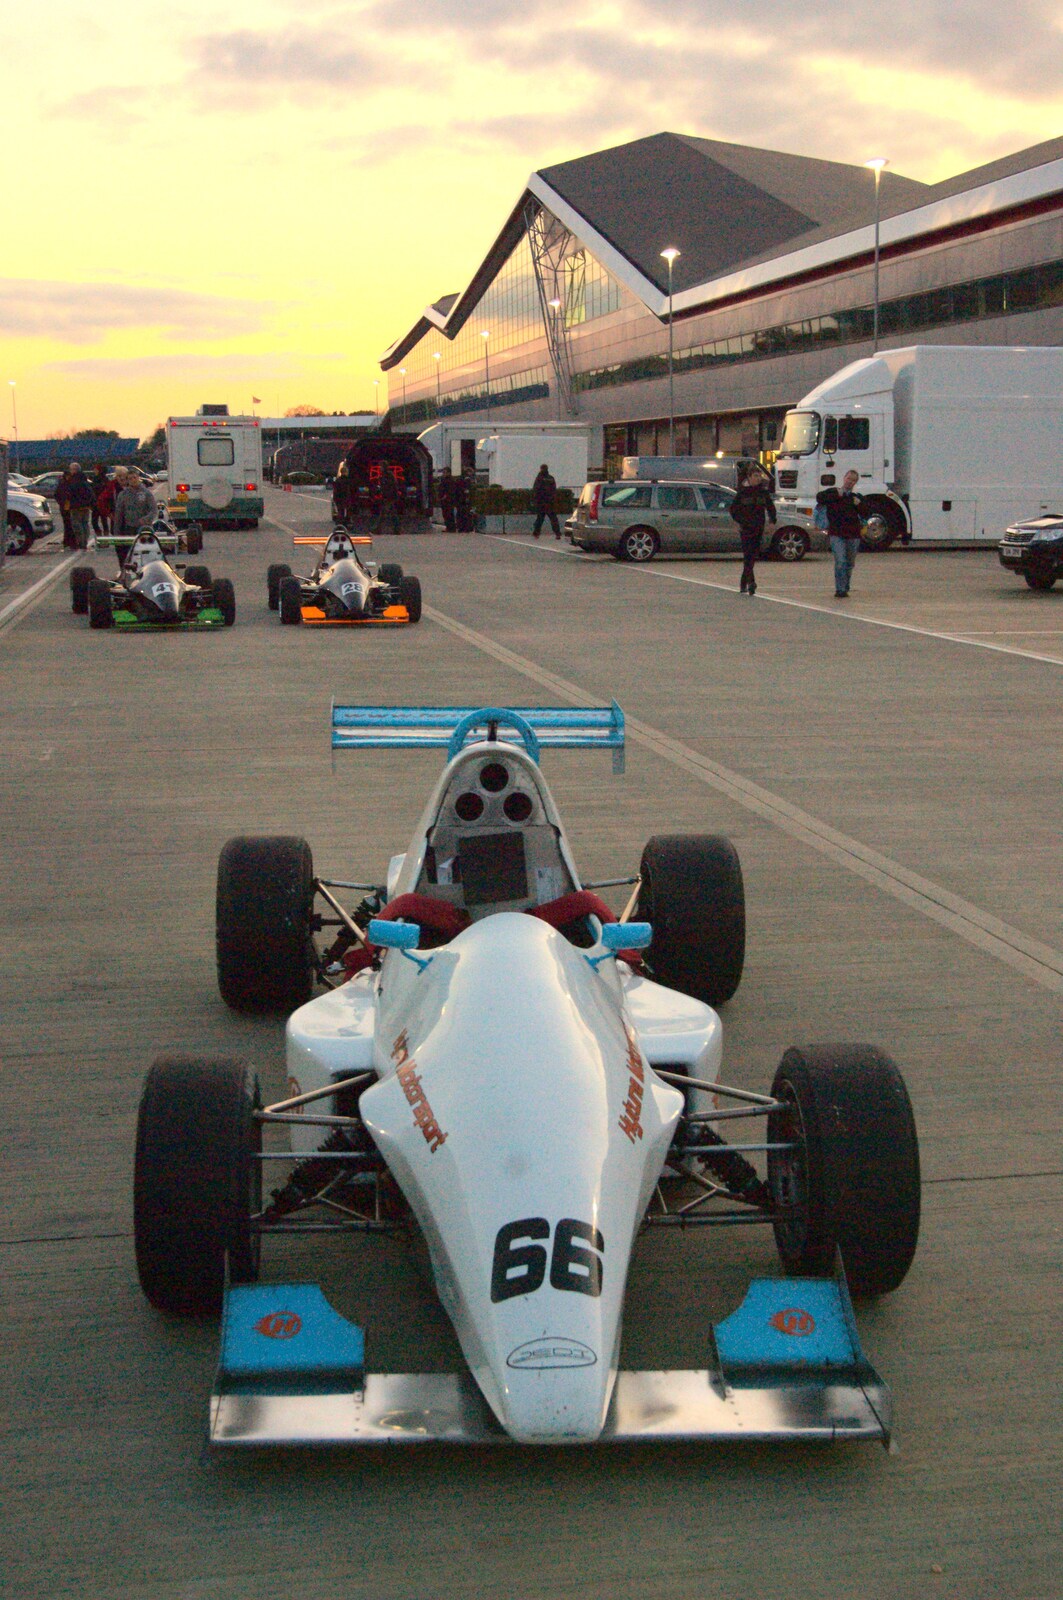 A racing car, and Silverstone in the setting sun from TouchType at Silverstone, Northamptonshire - 22nd October 2011